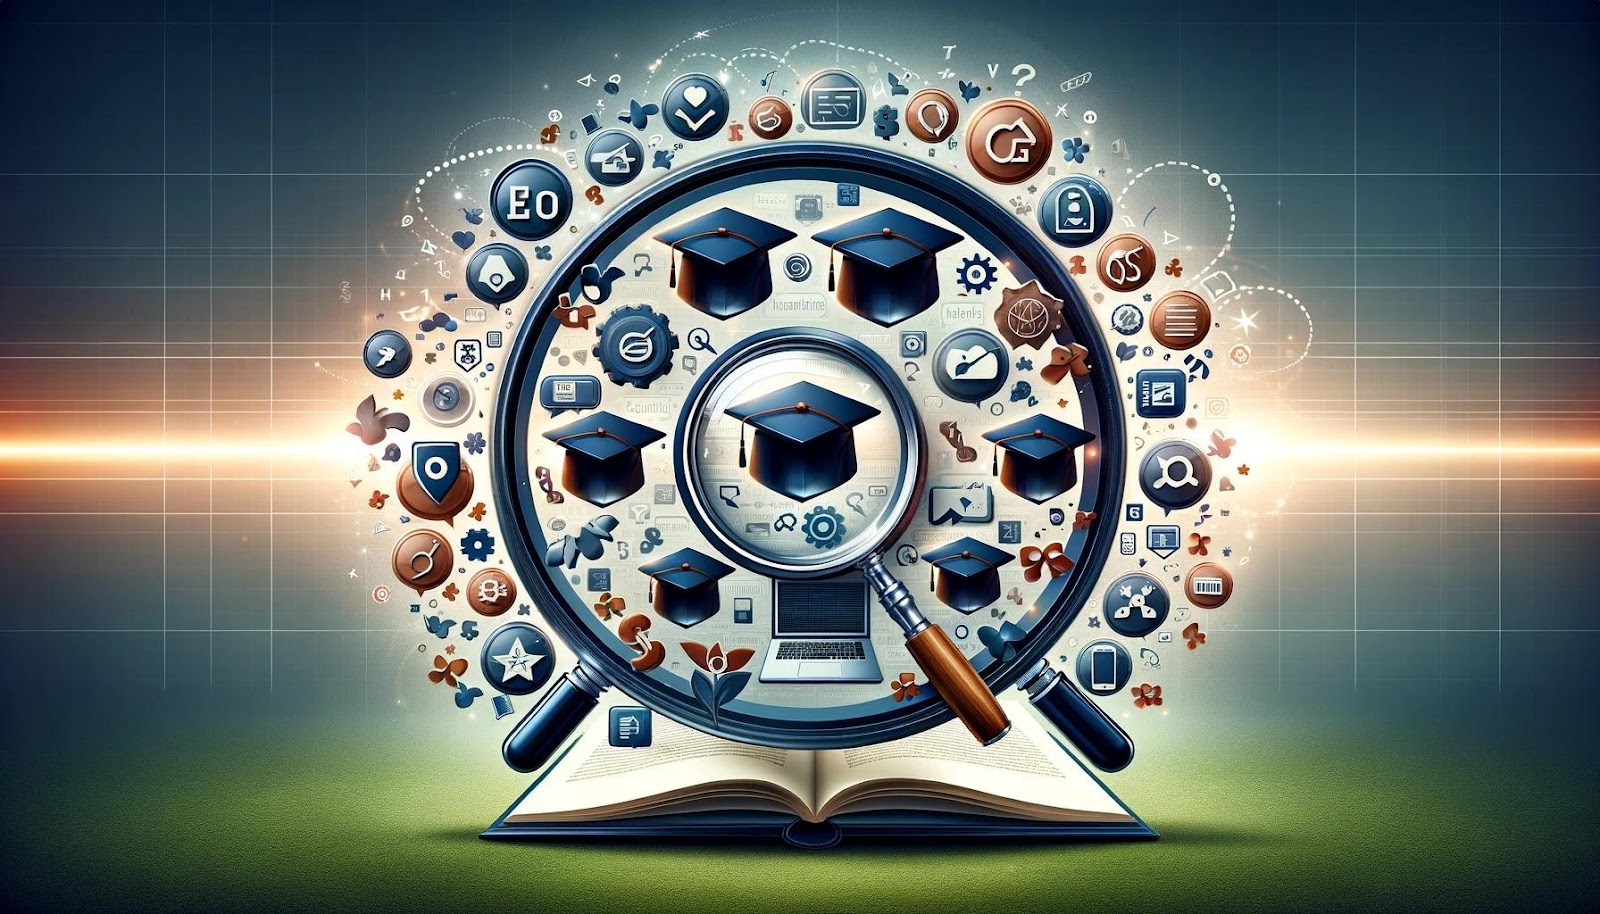 A conceptual widescreen image representing the services and expertise of a generic higher education marketing company. The design features a circle of academic graduation caps symbolizing their focus on education-based clients. Within this circle are various symbols: a magnifying glass overlaying a webpage for SEO and paid advertising; a stylized laptop screen for website design and development; a flow of letters and texts for inbound marketing; a variety of social media logos for social media management and advertisement; and a five-star rating symbol for reputation management. The arrangement is harmonious and indicative of the company's comprehensive approach to marketing in higher education.